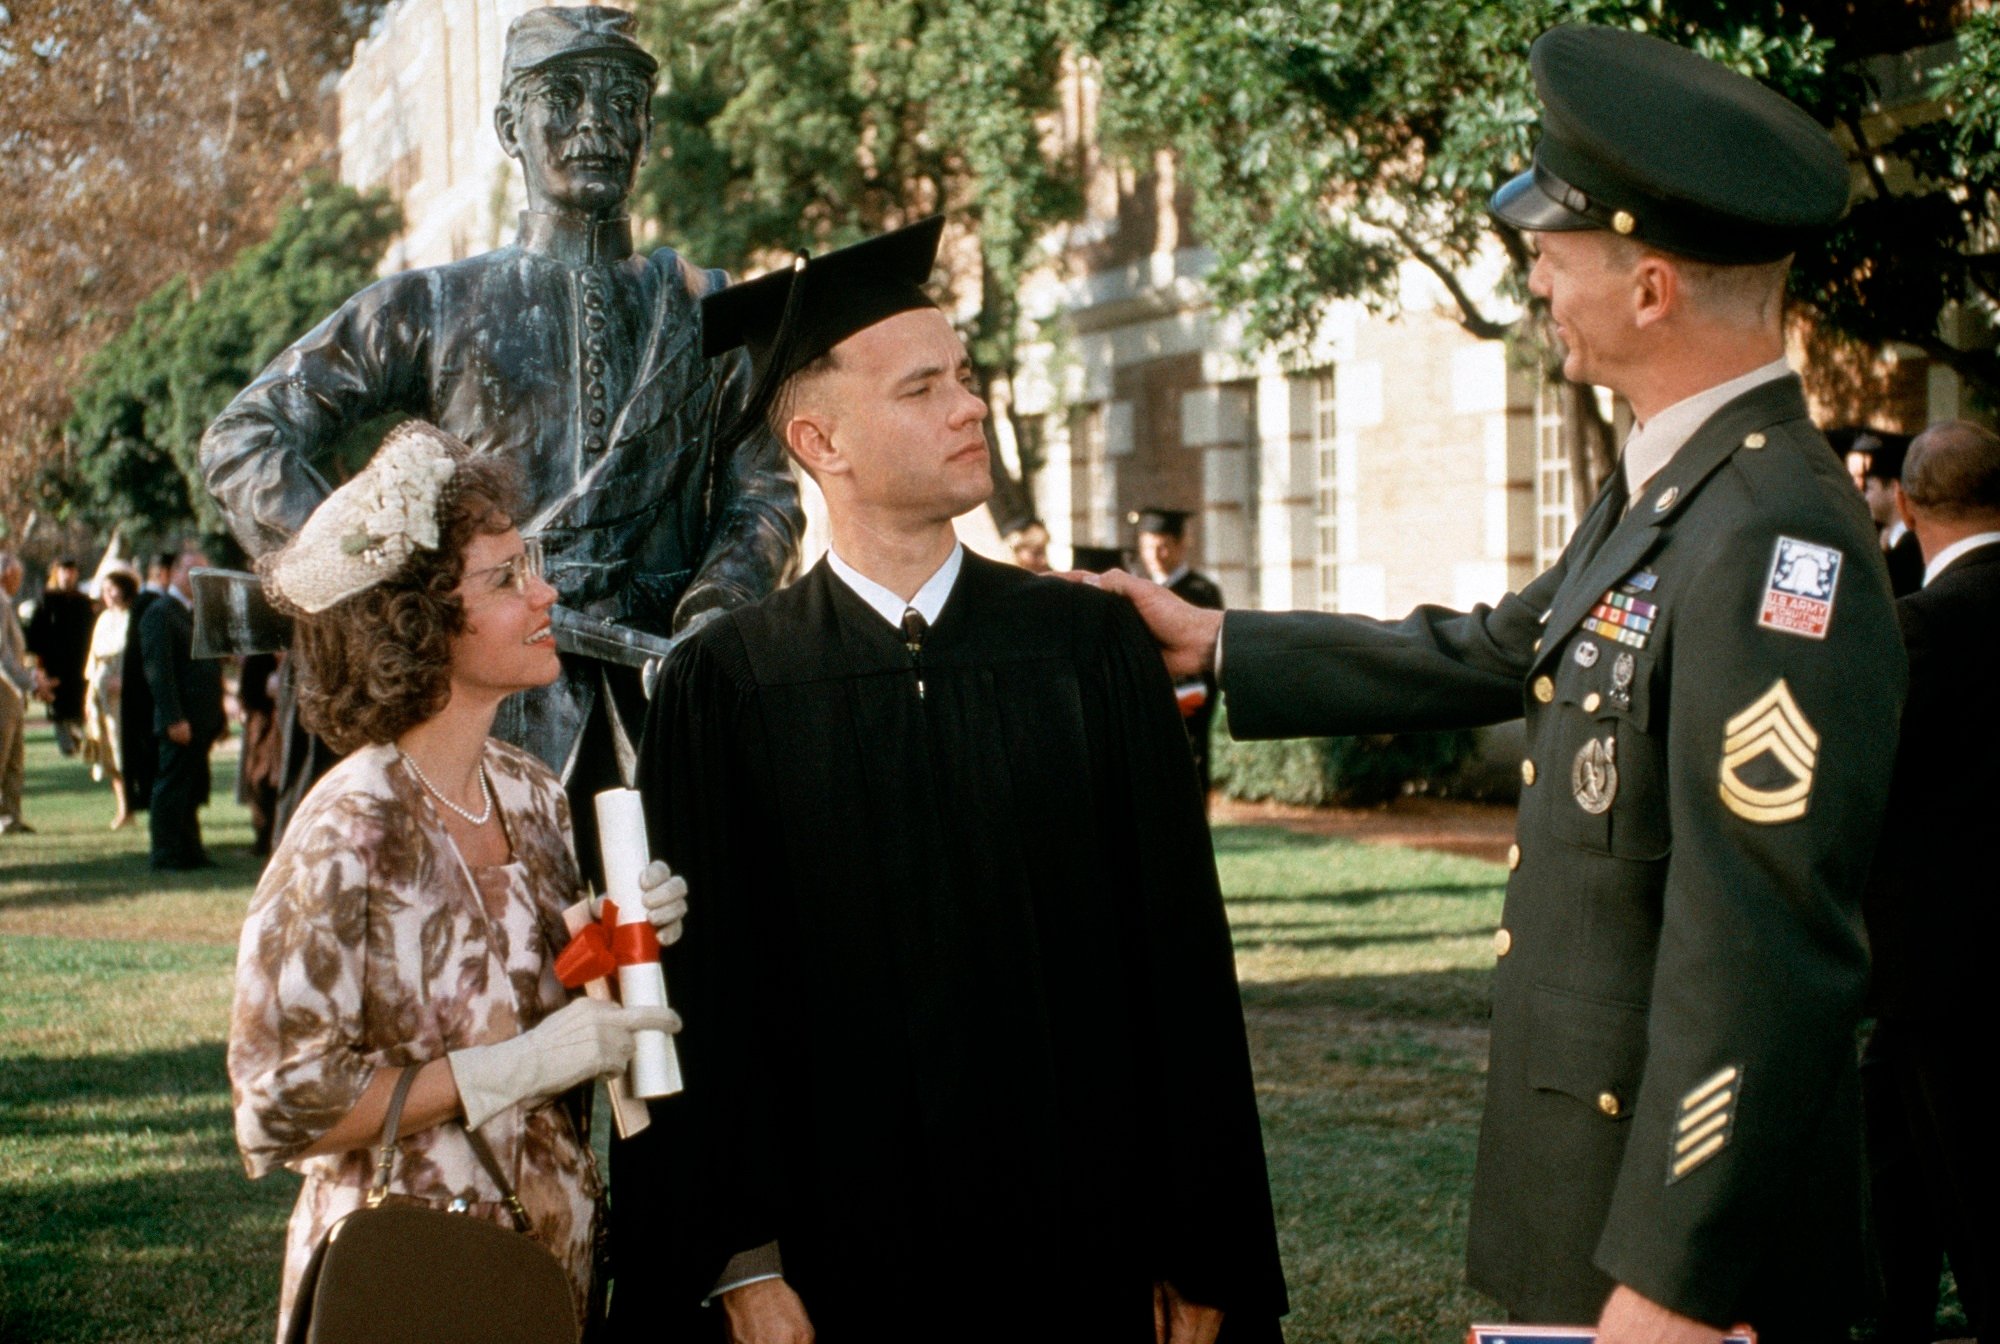 Tom Hanks and Sally Field meet a military recruiter in Forrest Gump